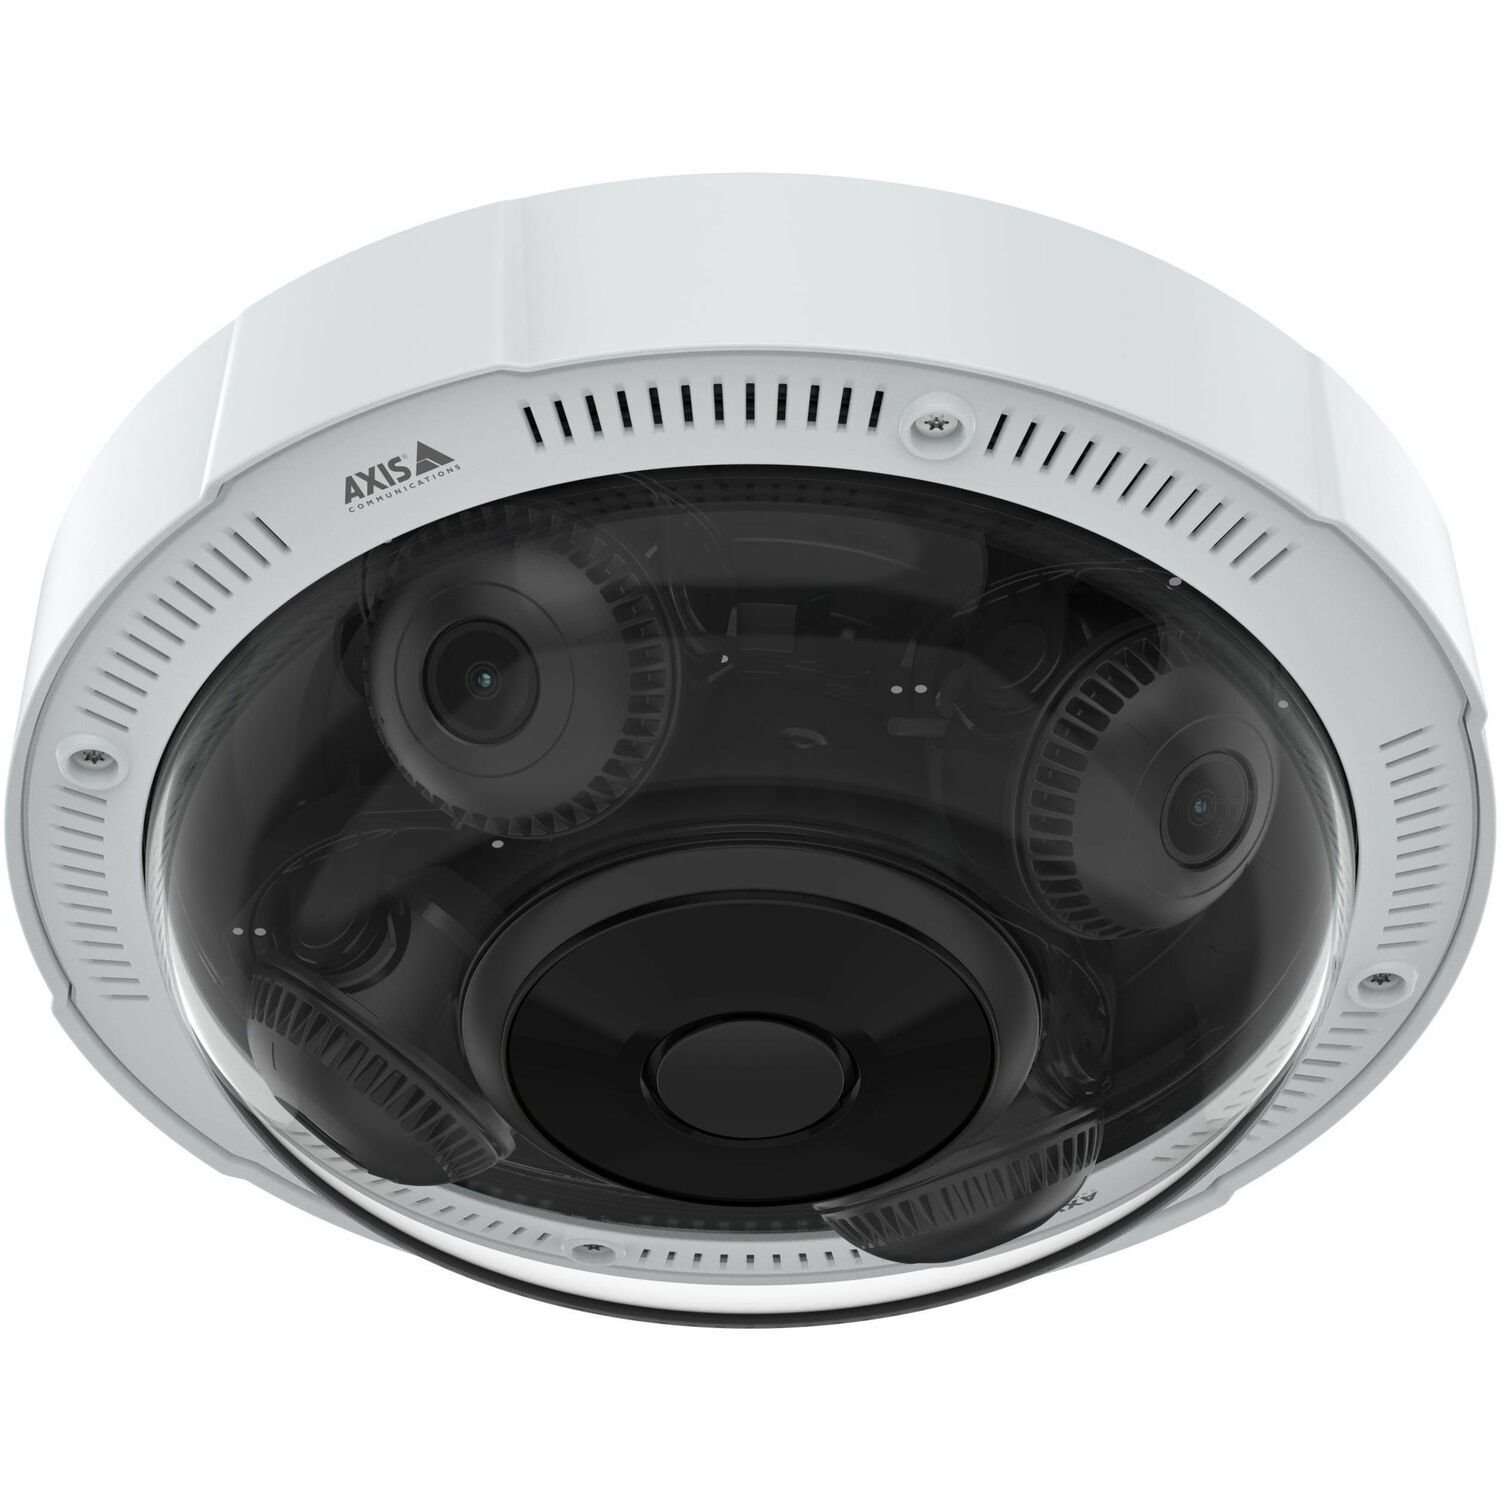 AXIS Panoramic P3737-PLE 5 Megapixel 2K Network Camera - Color - White - TAA Compliant